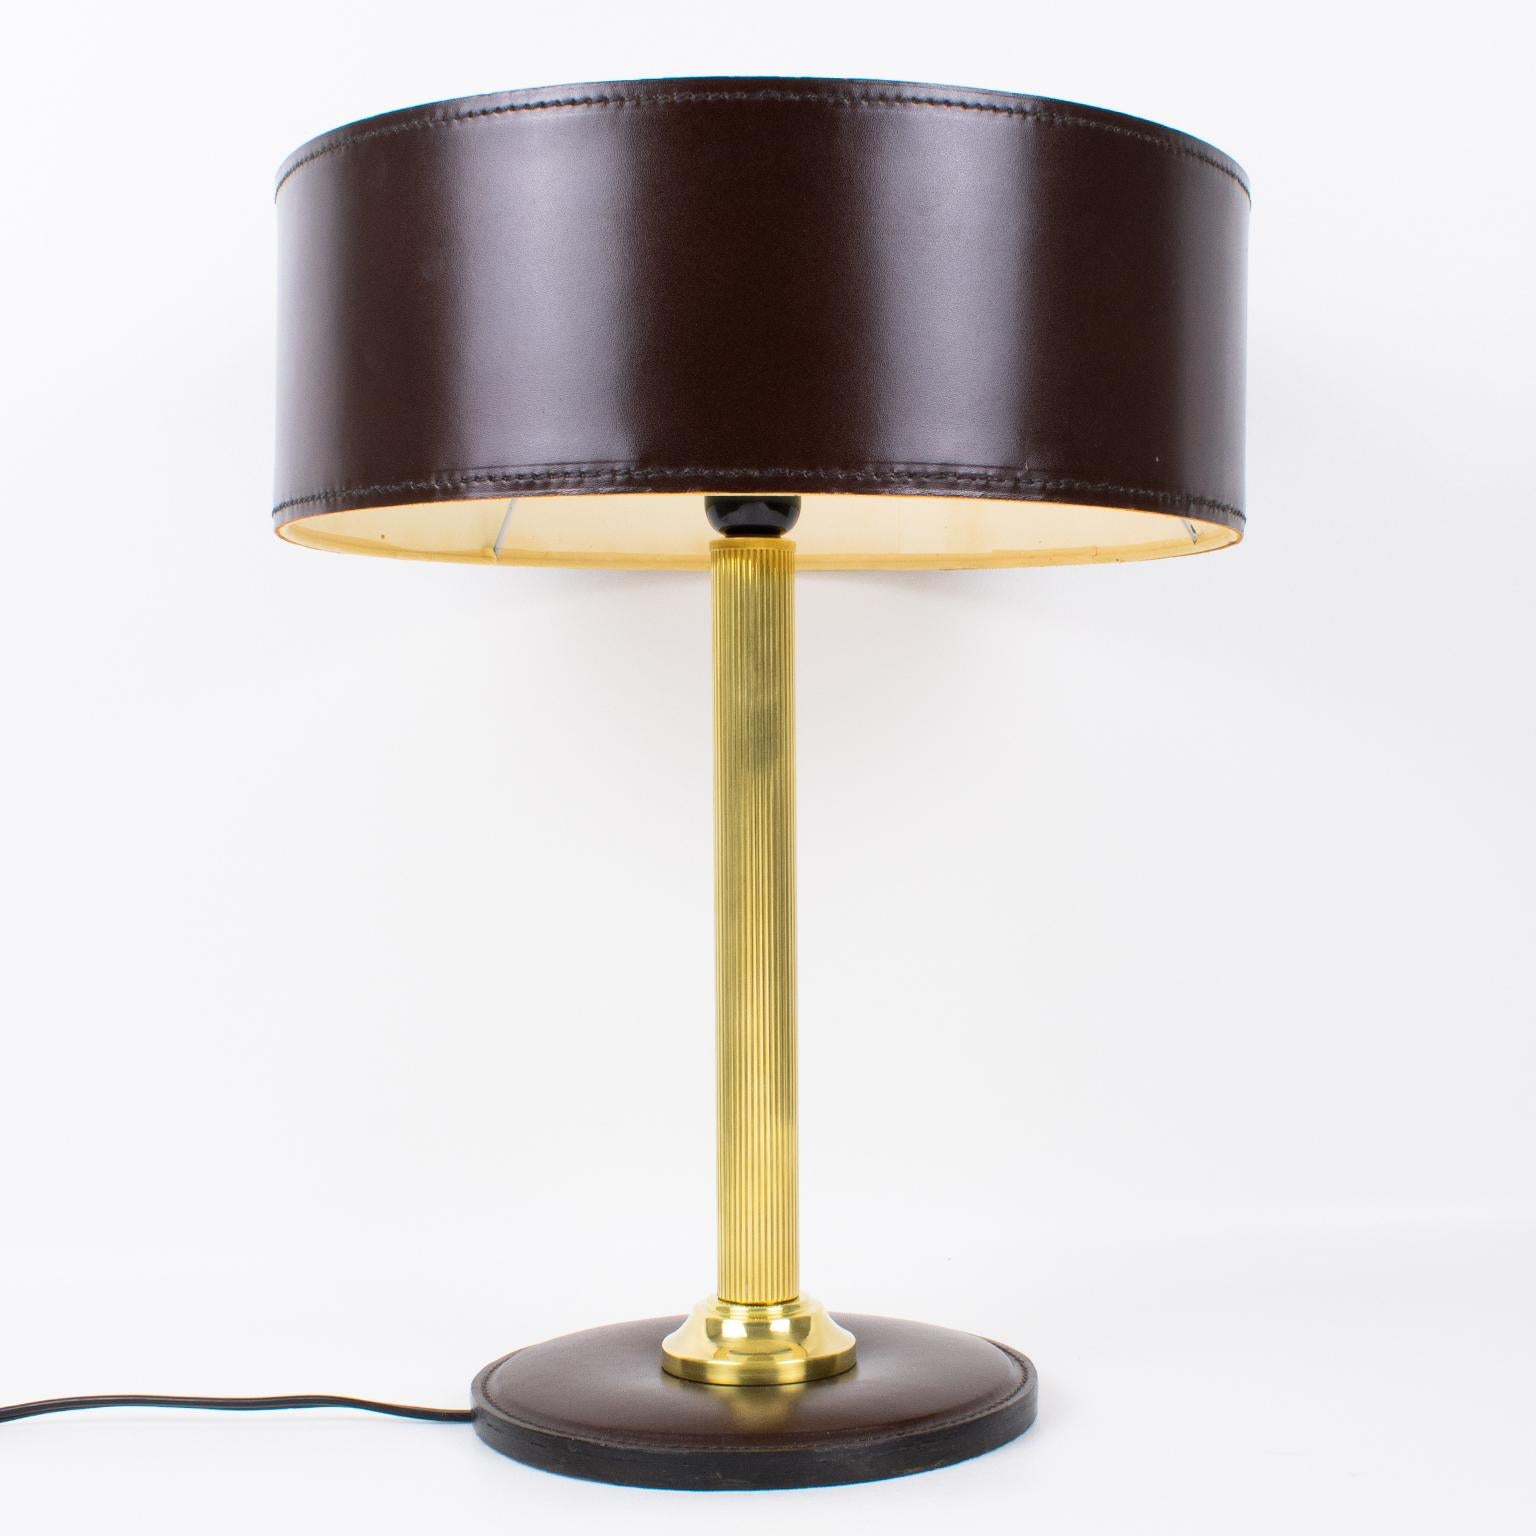 Jacques Adnet Brown Hand-Stitched Leather-Clad Table Lamp In Good Condition For Sale In Atlanta, GA